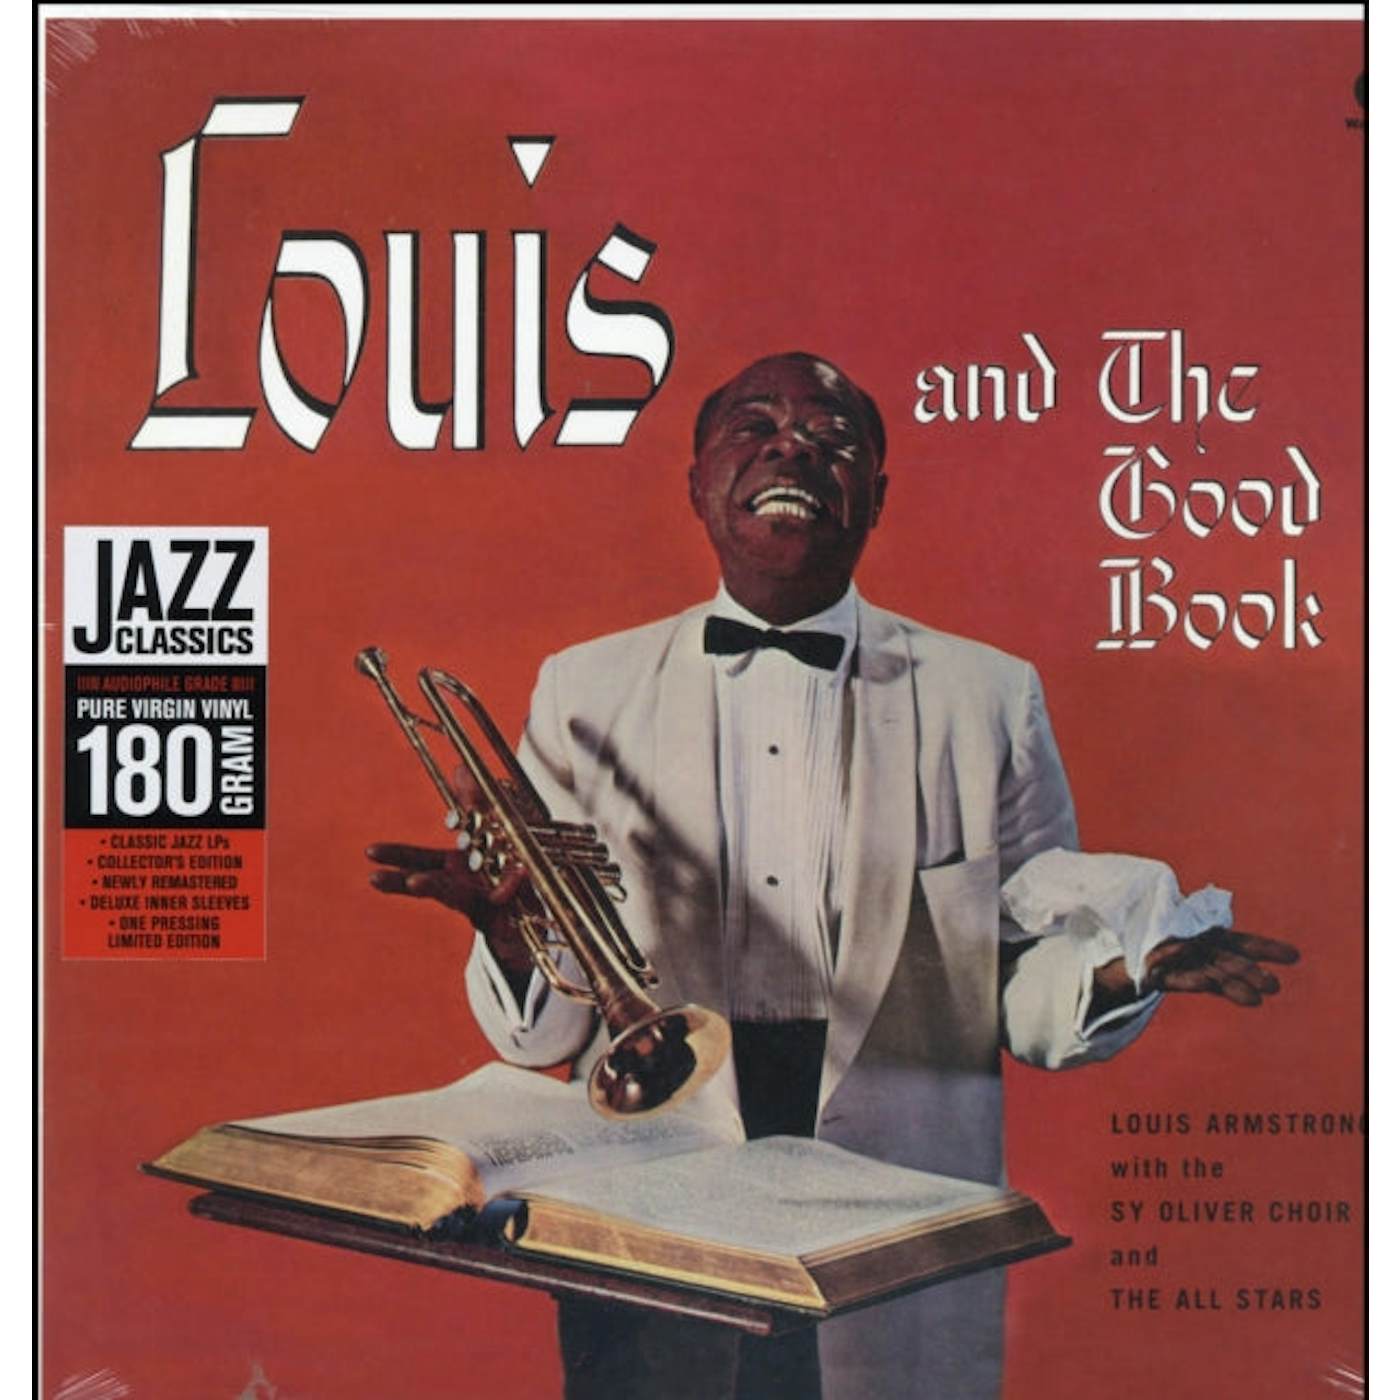 Louis Armstrong: Louis Wishes You A Cool Yule CD – Everything Jazz